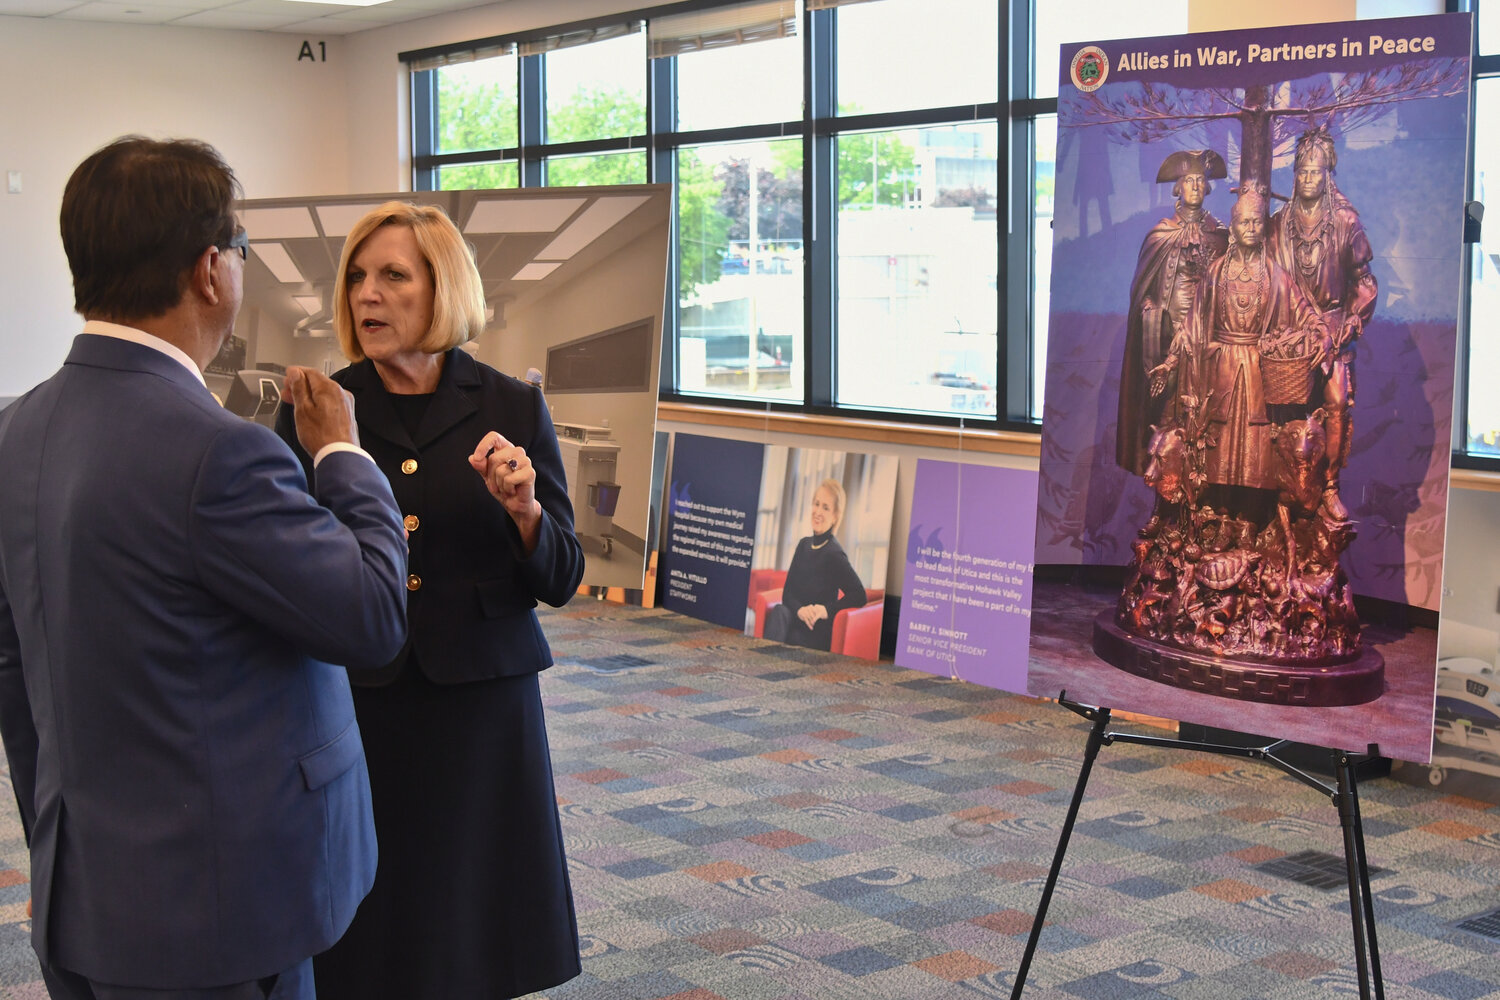 Ray Halbritter, CEO of Oneida Nation Enterprises and representative for the Oneida Indian Nation, and Darlene Stromstad, president and CEO of MVHS, discuss their continued partnership after announcing the $1 million donation from the Oneida Indian Nation on Tuesday. To the right is a depiction of what the bronze statue will look like at the entrance to the Wynn Hospital.